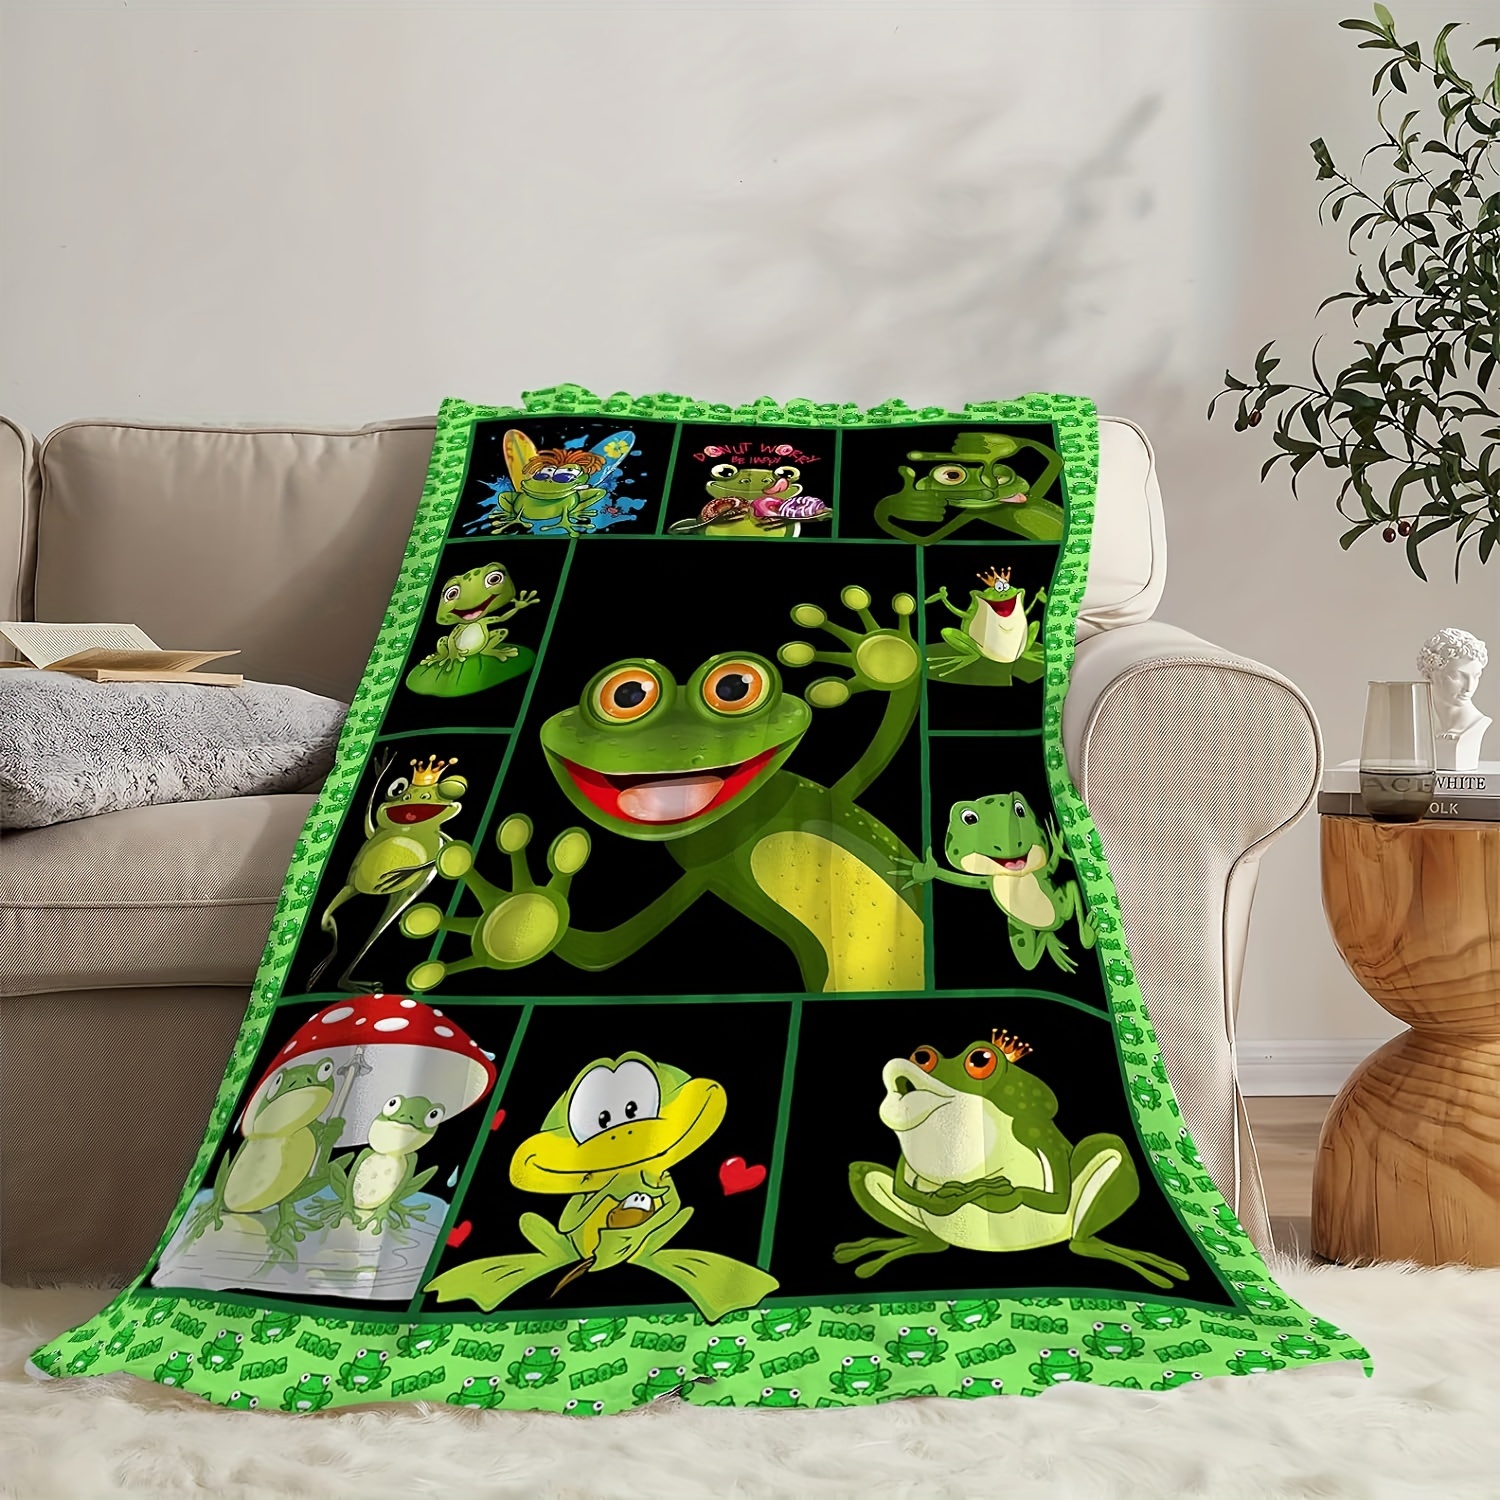  Frog Blanket, Frog Gifts for Women Girls, for Frog Lovers, Frog  Themed Gifts, Just A Girl Who Loves Frogs Blanket, Frog Birthday  Decorations, Soft Cozy Plush Frog Throw Blanket 50 x